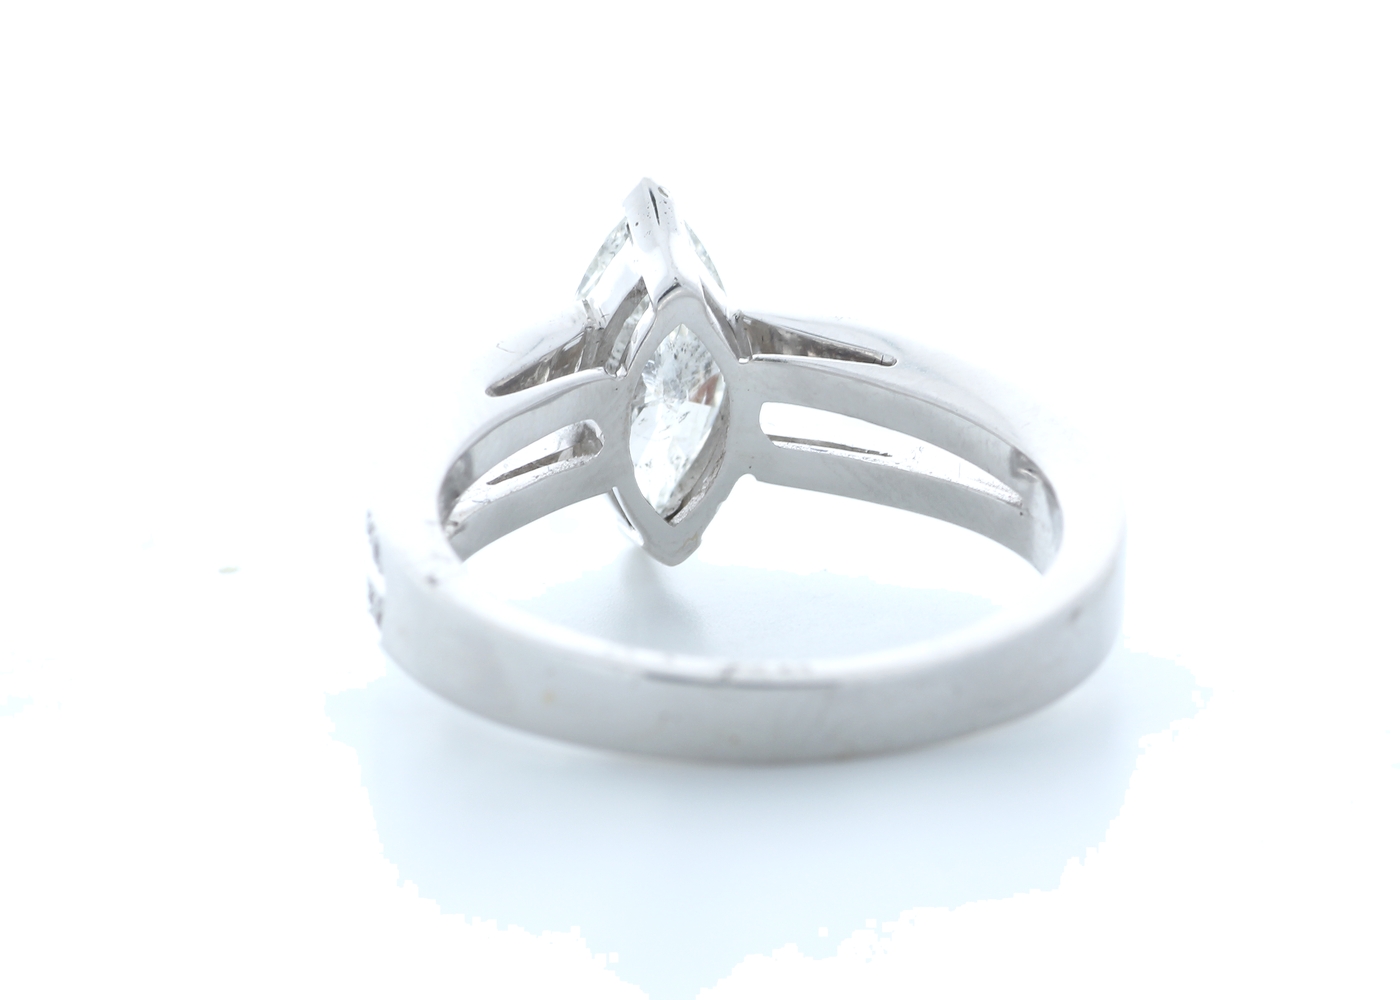 18ct White Gold Marquise Cut Diamond Ring 1.41 (1.11) Carats - Image 3 of 5